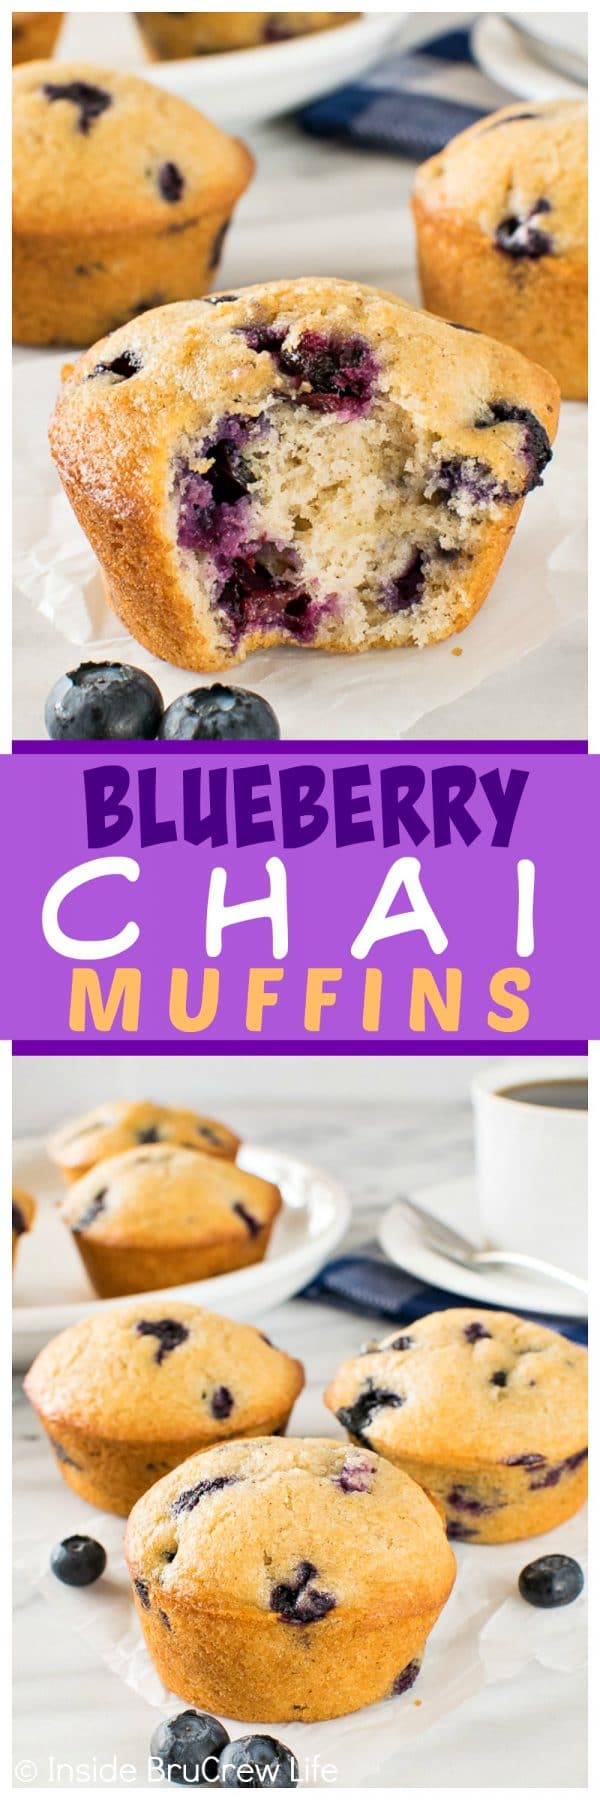 Blueberry Chai Muffins - soft fluffy muffins filled with spices and fresh berries are a delicious way to start out the morning. Great breakfast recipe!